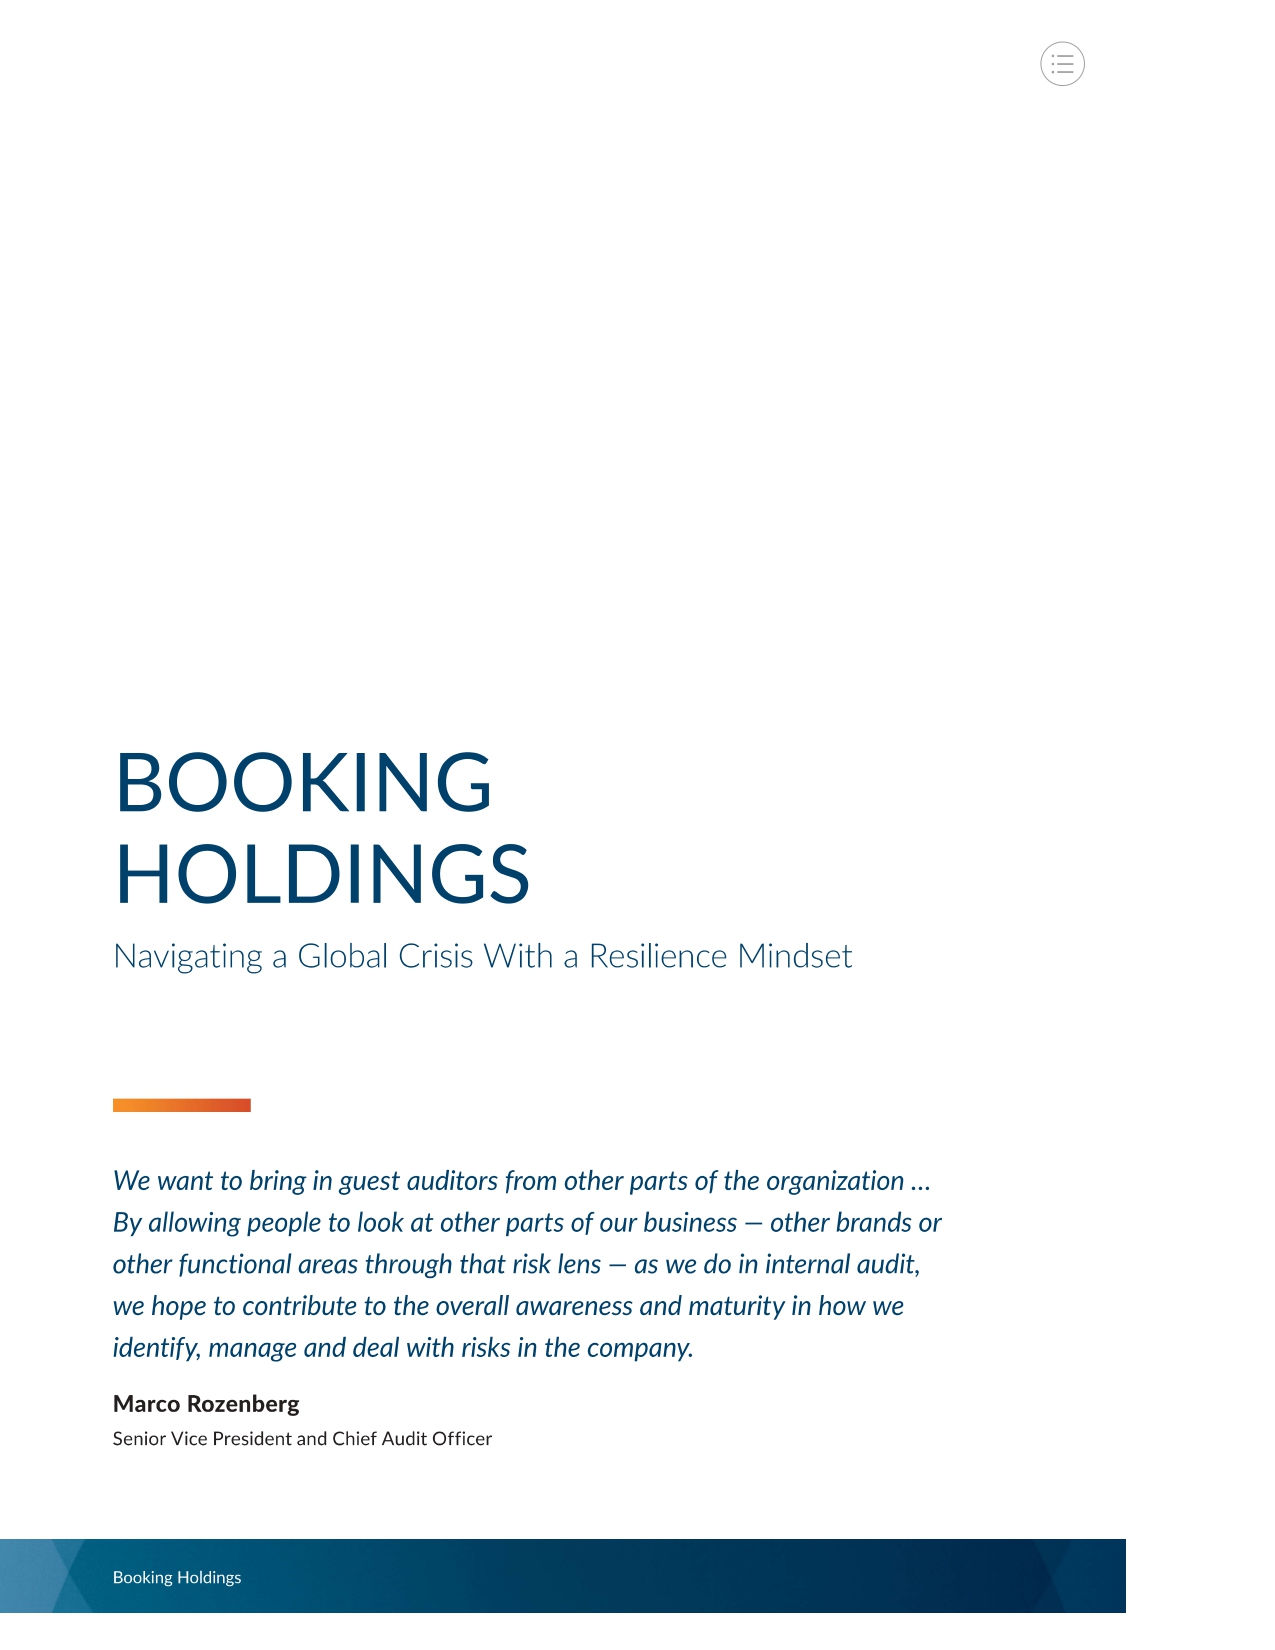 Screenshot of the first page of Booking Holdings.